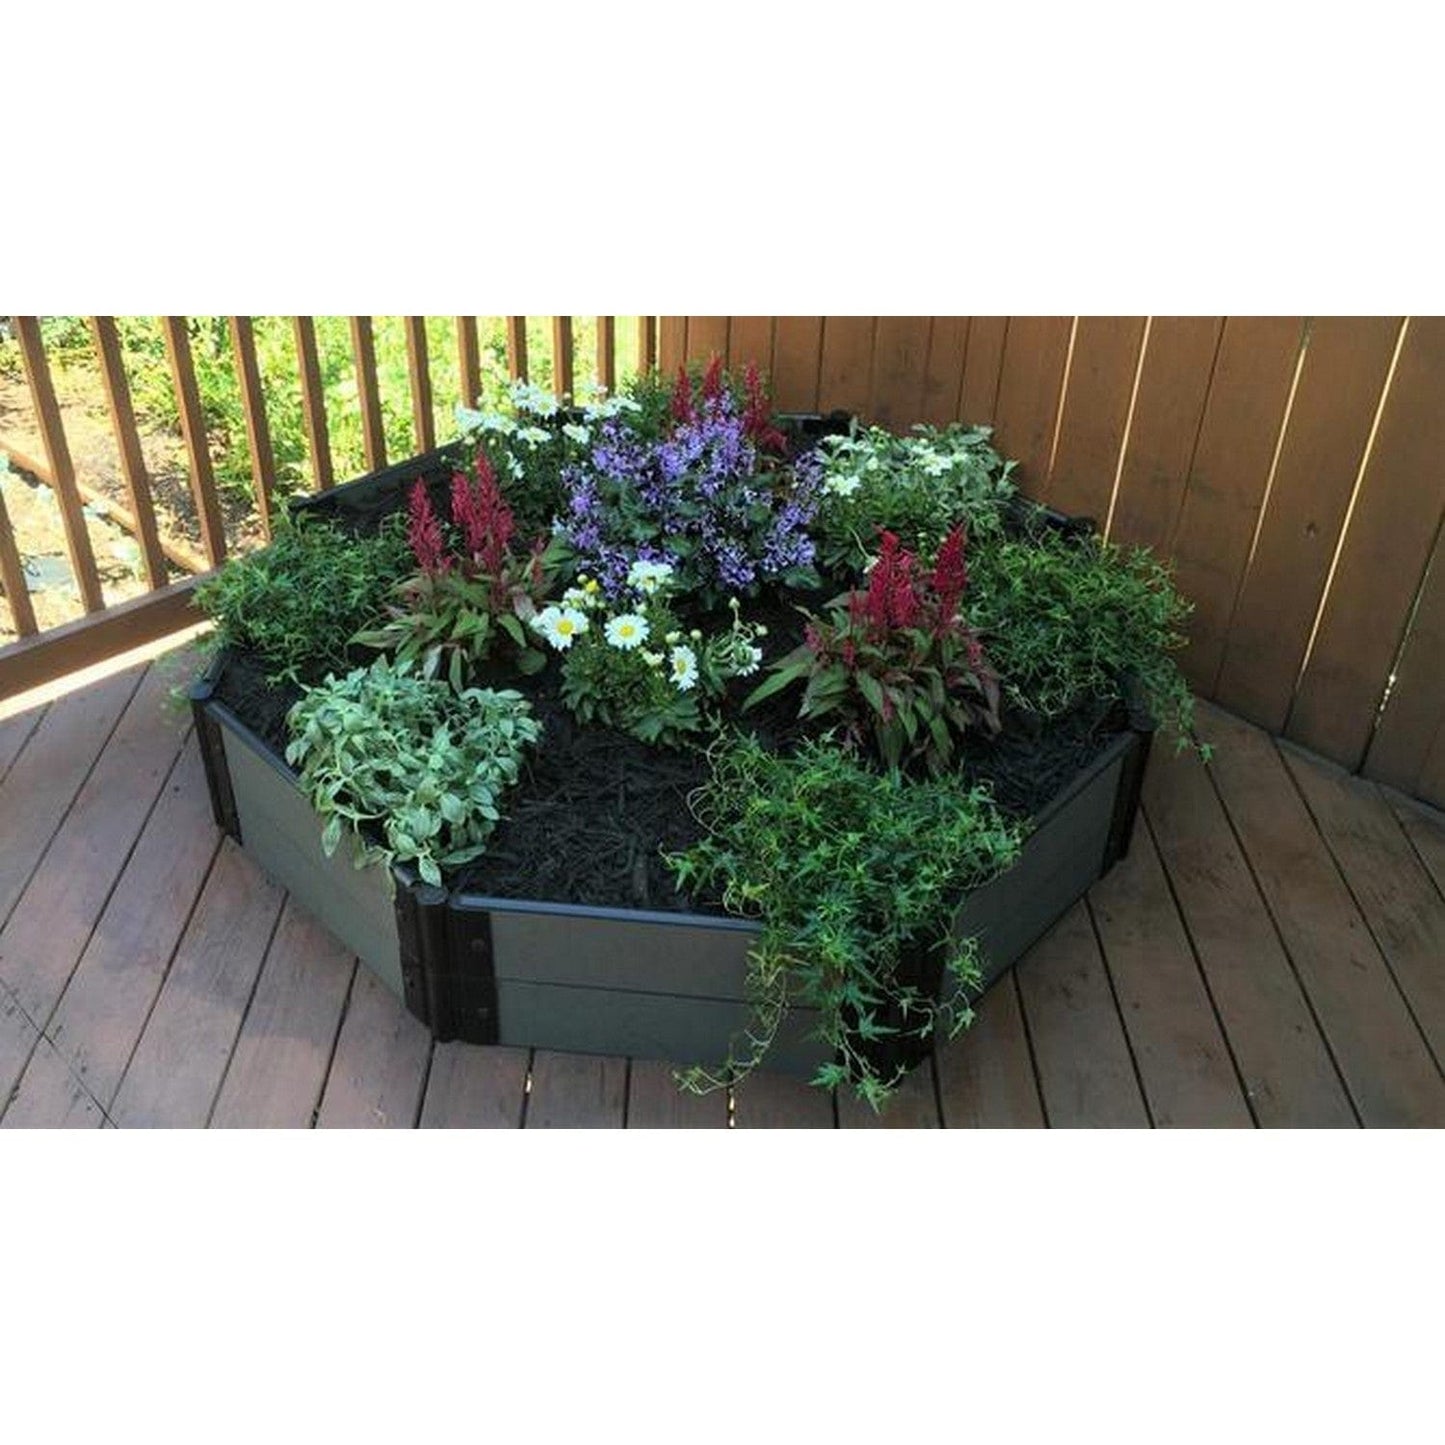 Frame It All Gardening Accessories Frame It All | Tool-Free St. John Baptistry Raised Garden Bed (Octagon) 5' X 5' X 16.5" - Classic Sienna - 2" Profile 200003462